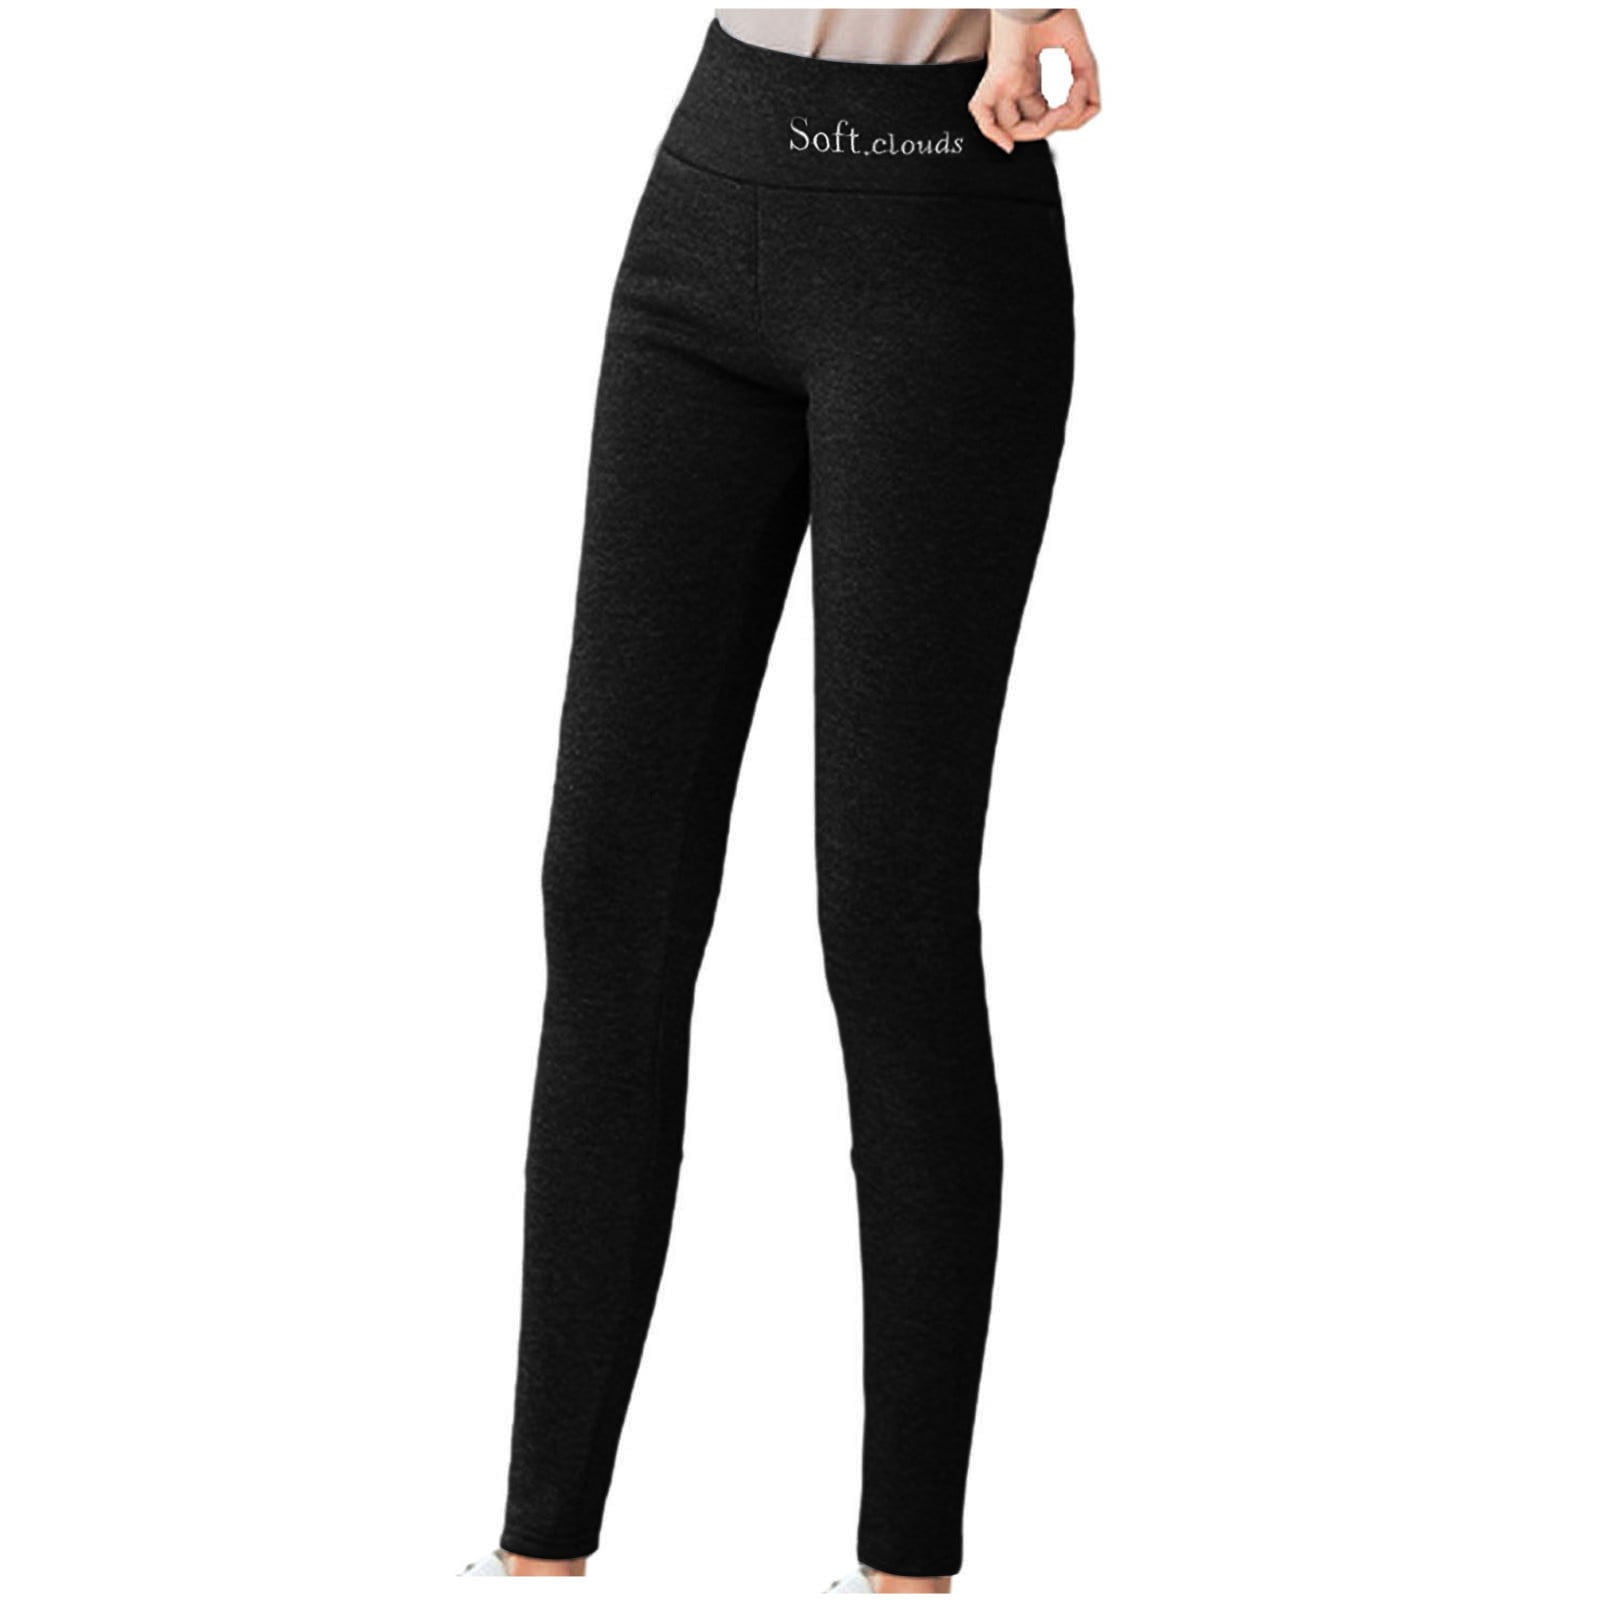 AMDBEL Fleece Leggings for Women 2023 Casual Warm Winter Pants Slim Leggings  Soft Clouds Fleece Lined Thermal Leggings Tights - Coupon Codes, Promo  Codes, Daily Deals, Save Money Today